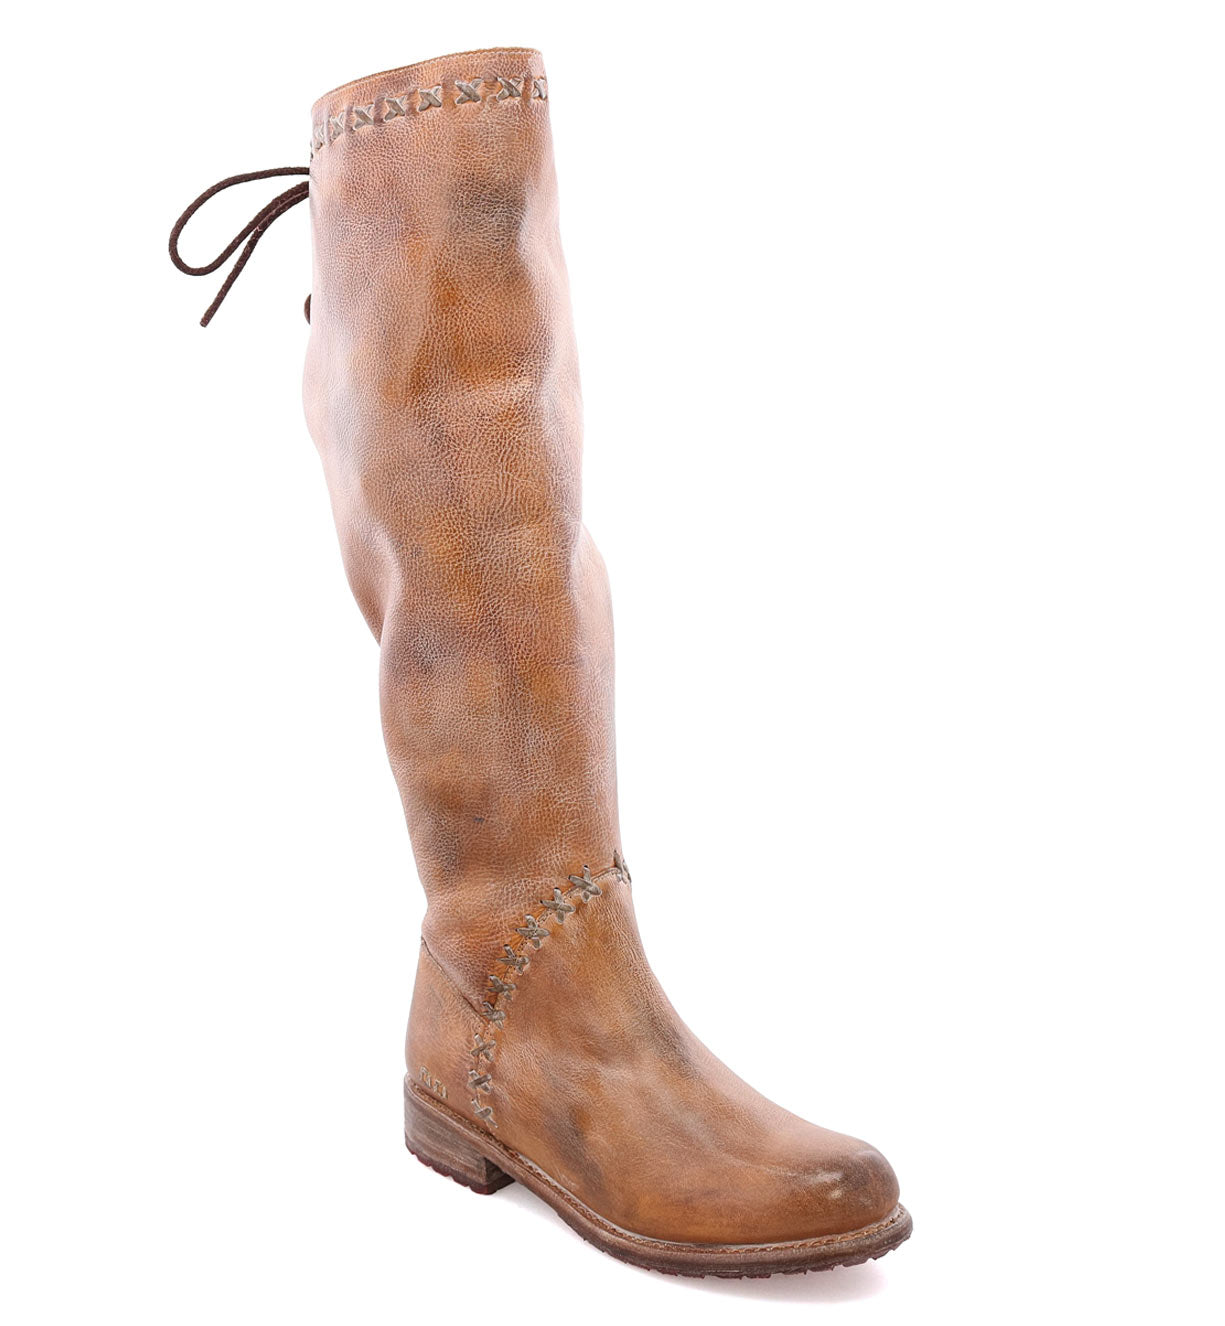 A women's brown leather Bed Stu Manchester III riding boot.